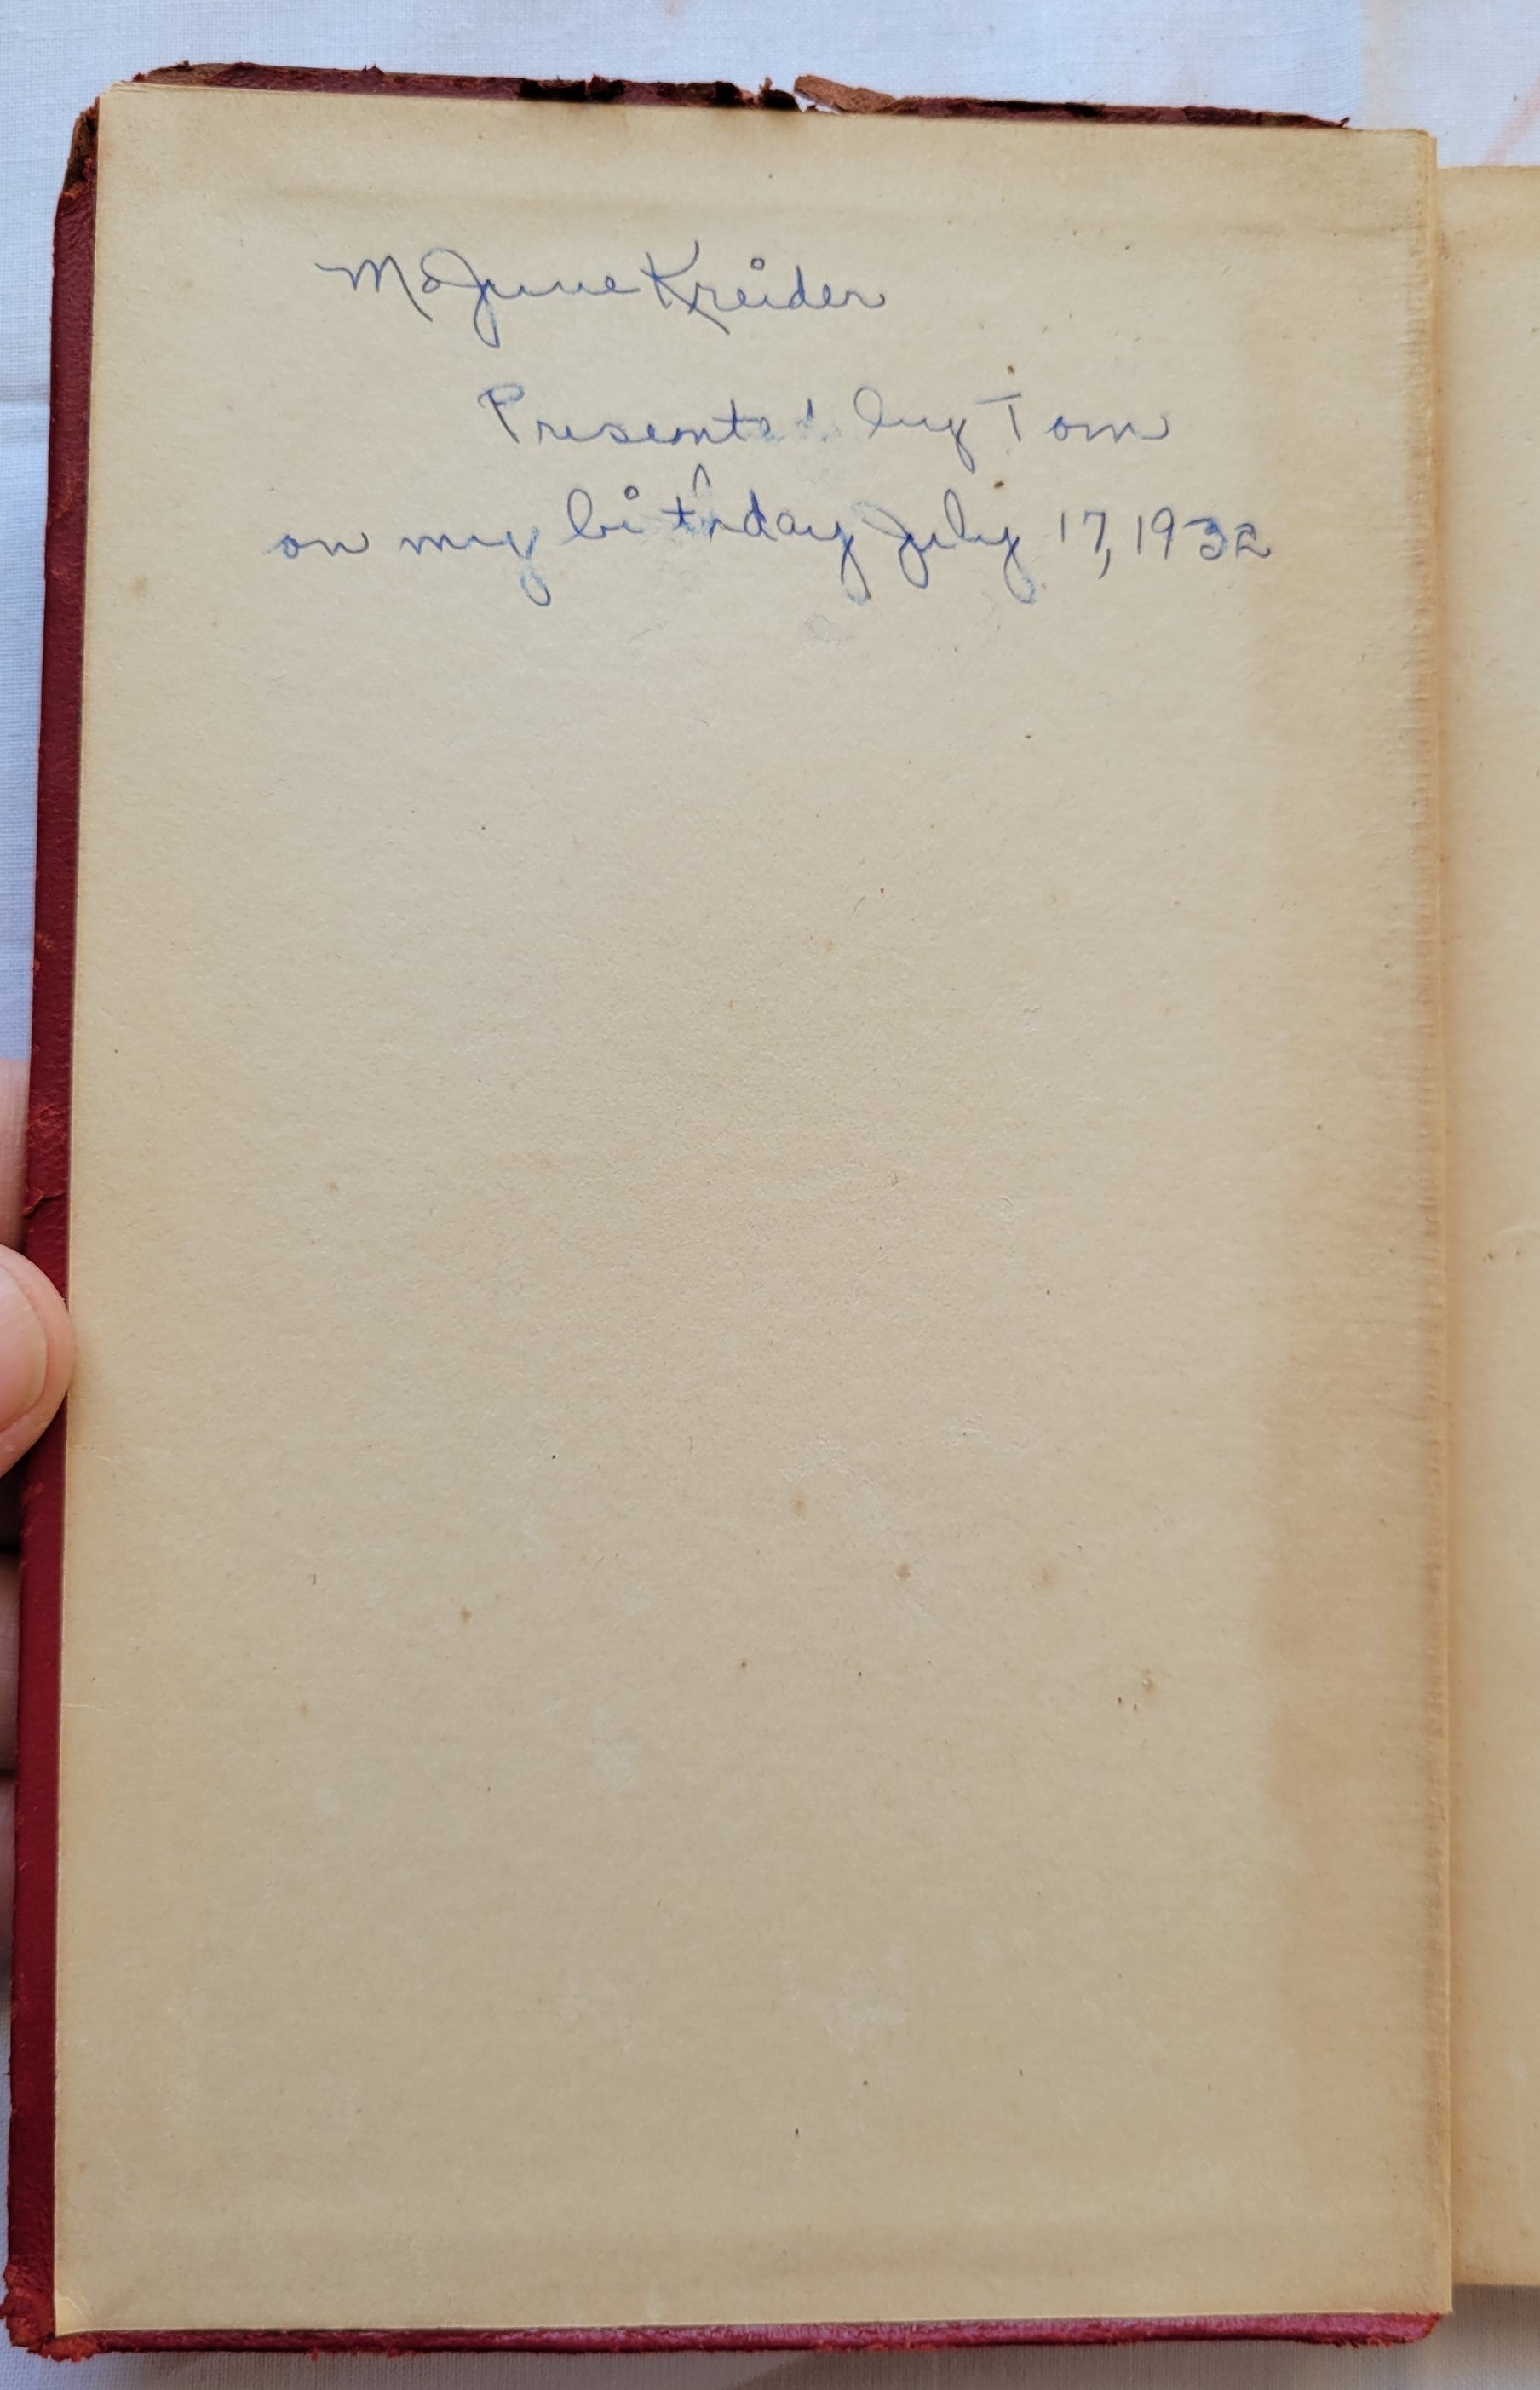 Antique book for sale, Homer's ancient Greek epic, The Odyssey translated by Alexander Pope, published by A. L. Burt Company (before 1932), with notes from Rev. Theodore Alois Buckley M.A. View of inside with hand writing from 1932.